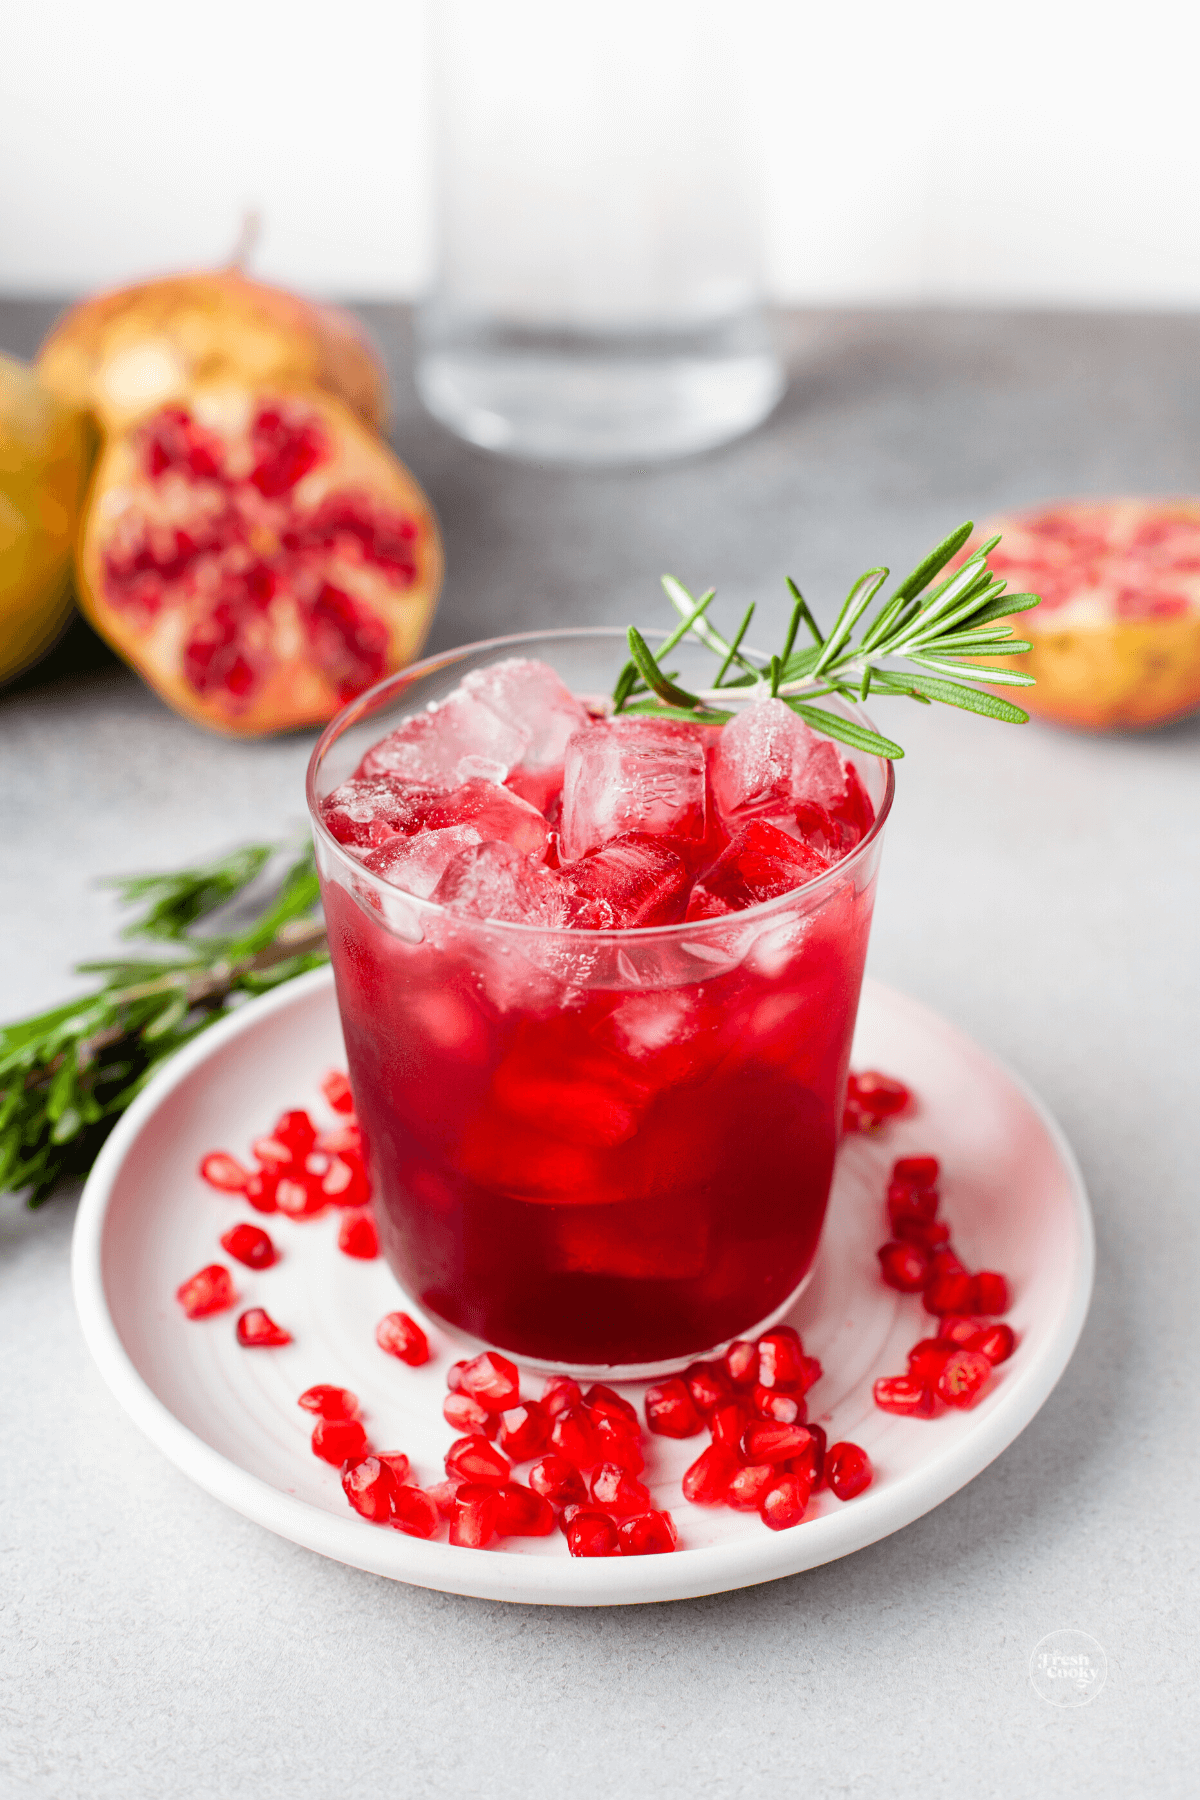 Festive Pomegranate Hibiscus Margarita with fresh pomegranate in background and arils on a plate.